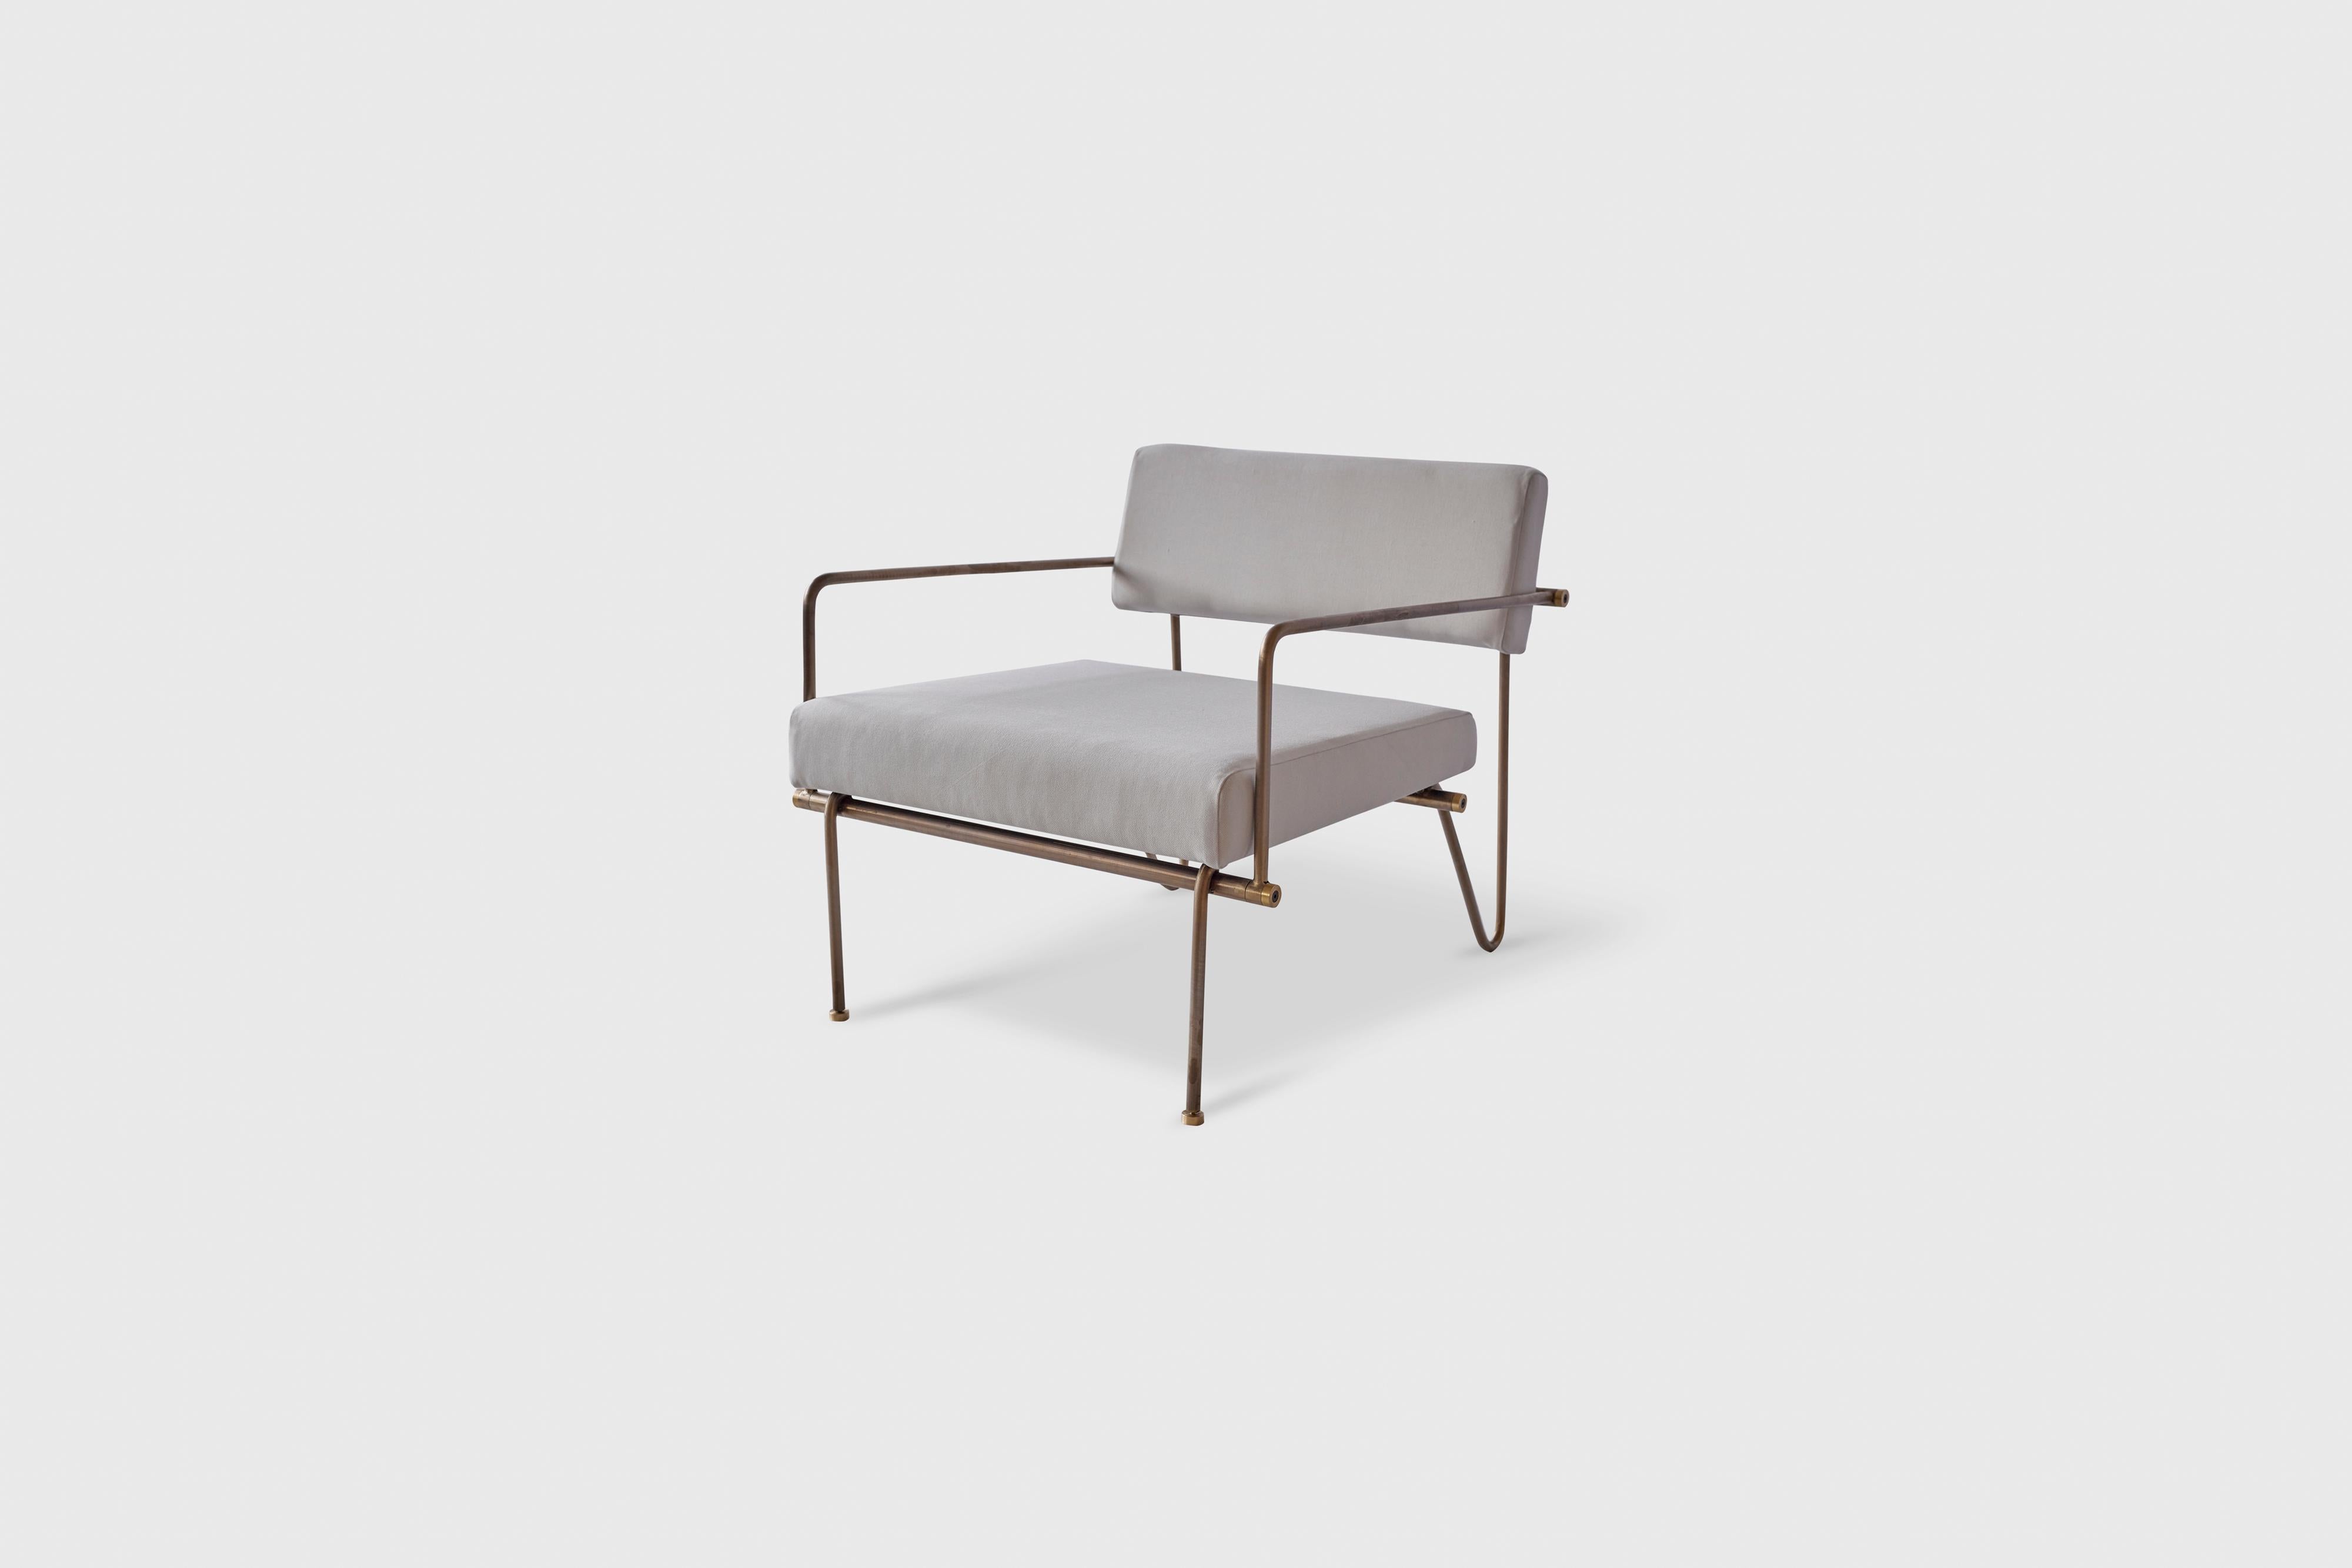 Beachwood loveseat by Atra Design
Dimensions: D 67 x W 67.5 x H 67.8 cm
Materials: steel with golden finish, fabric
Available in leather and fabric seat.

Atra Design
We are Atra, a furniture brand produced by Atra form a mexico city–based